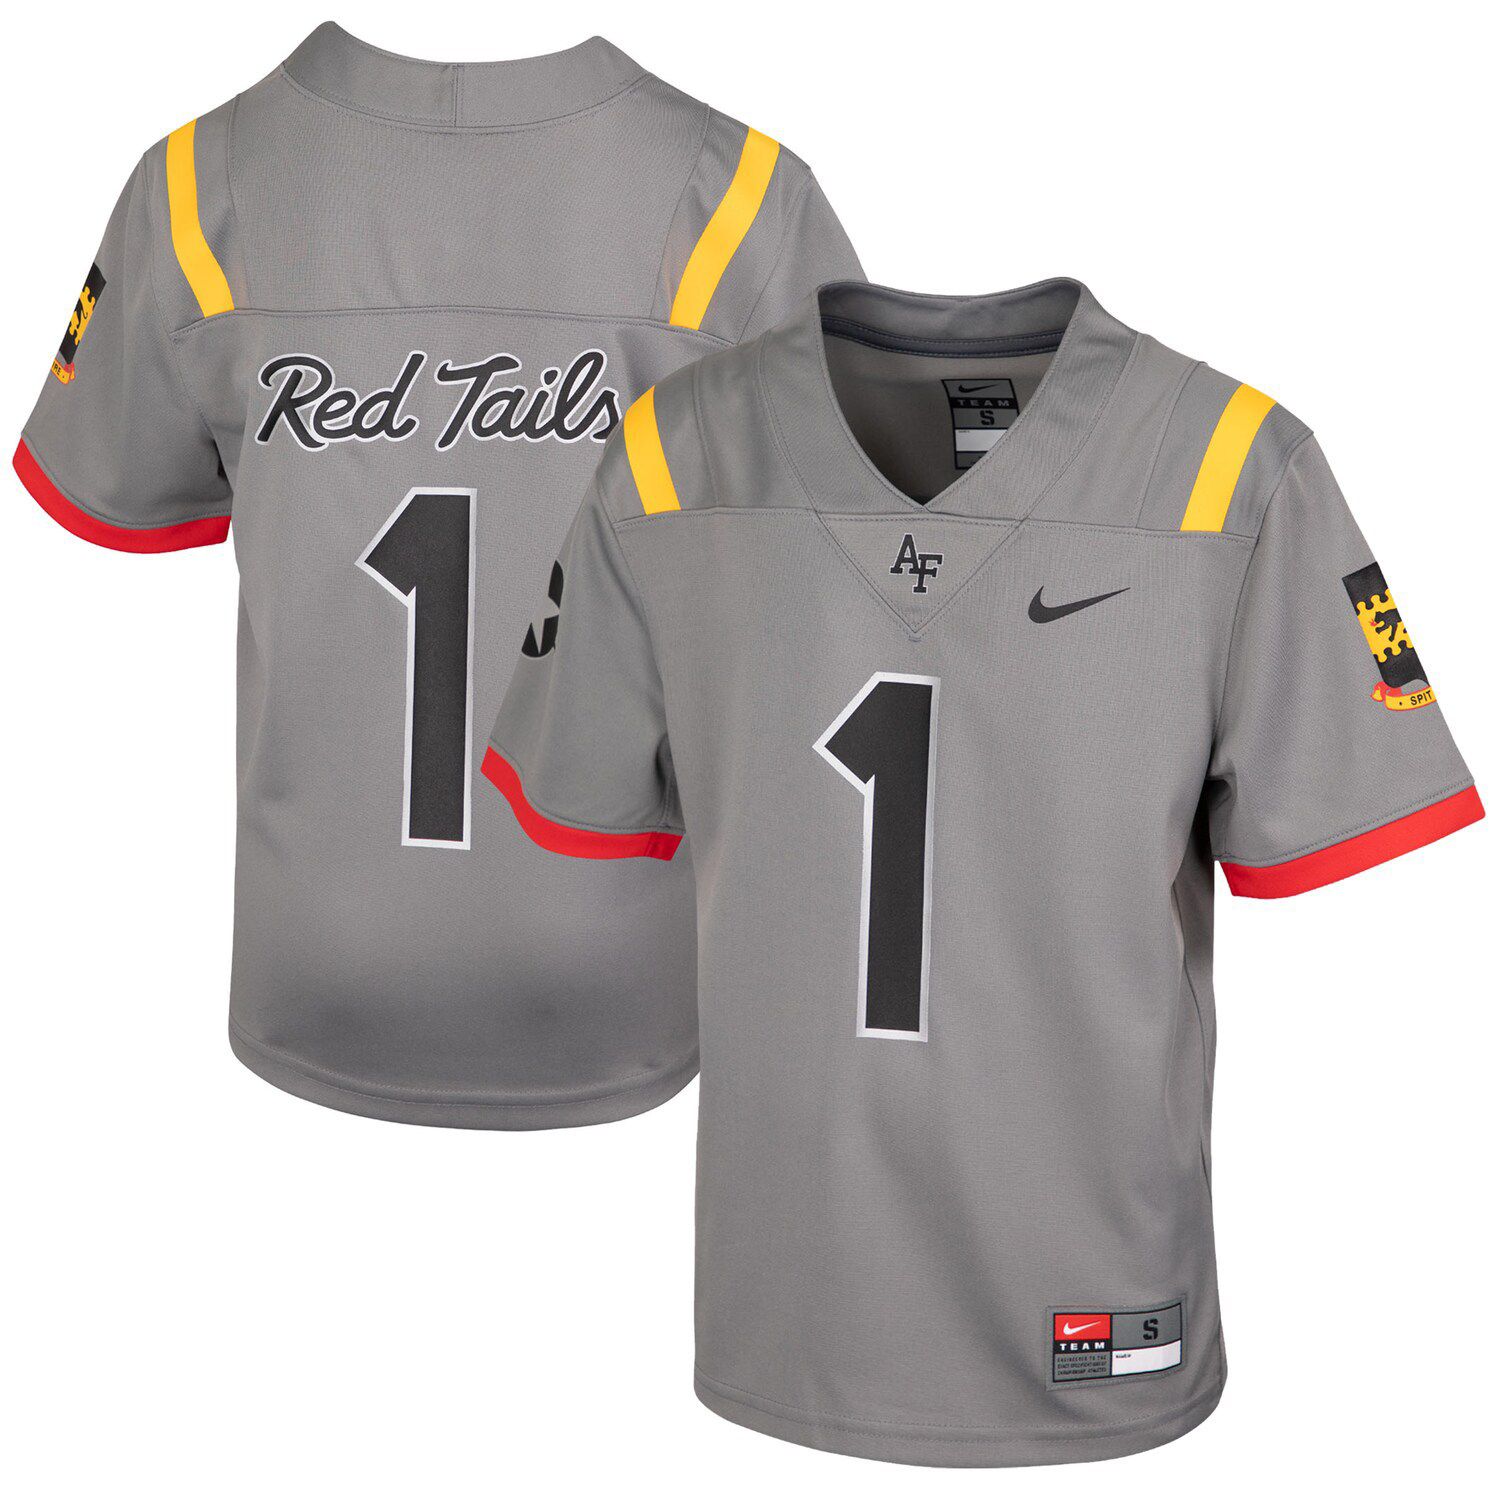 air force falcons jersey